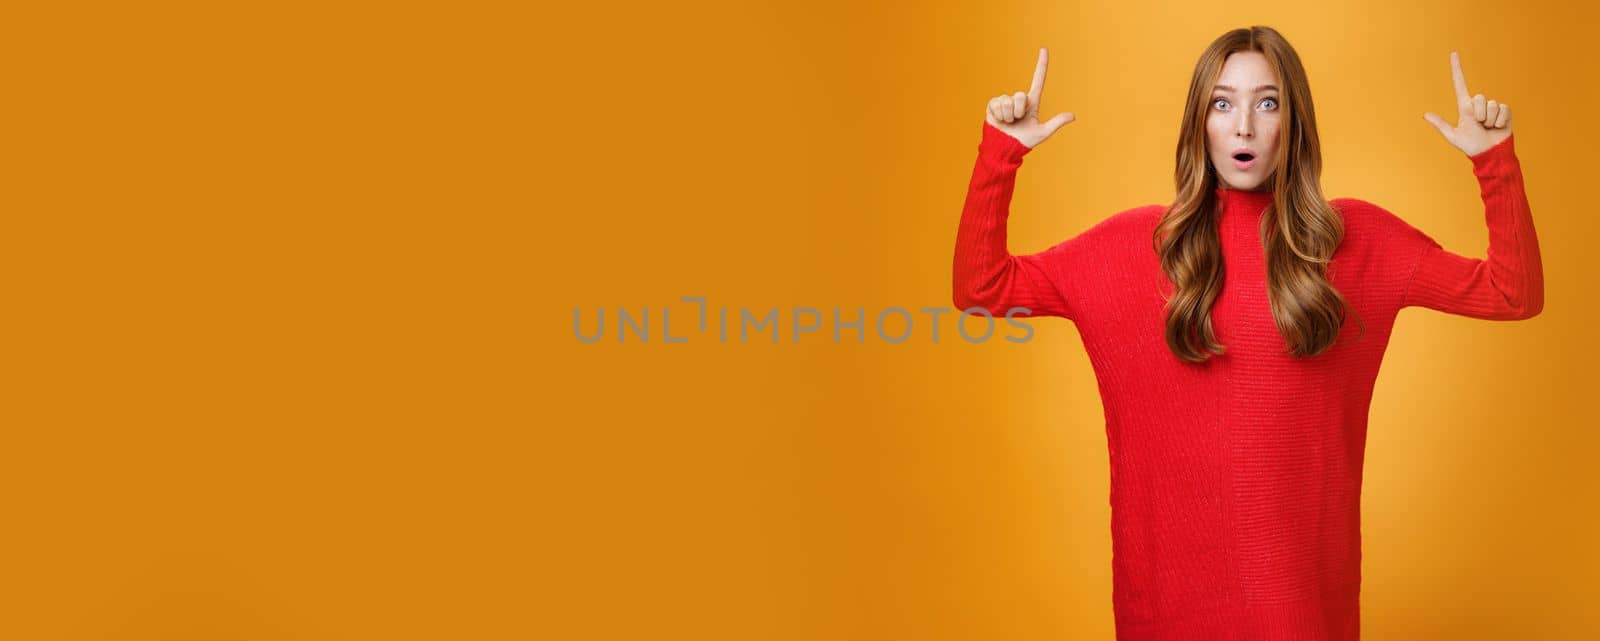 Lifestyle. Portrait of attractive and stylish redhead 25s female in knitted red dress gasping from amazement open mouth questioned and surprised as pointing up at astonishing promotion over orange wall.